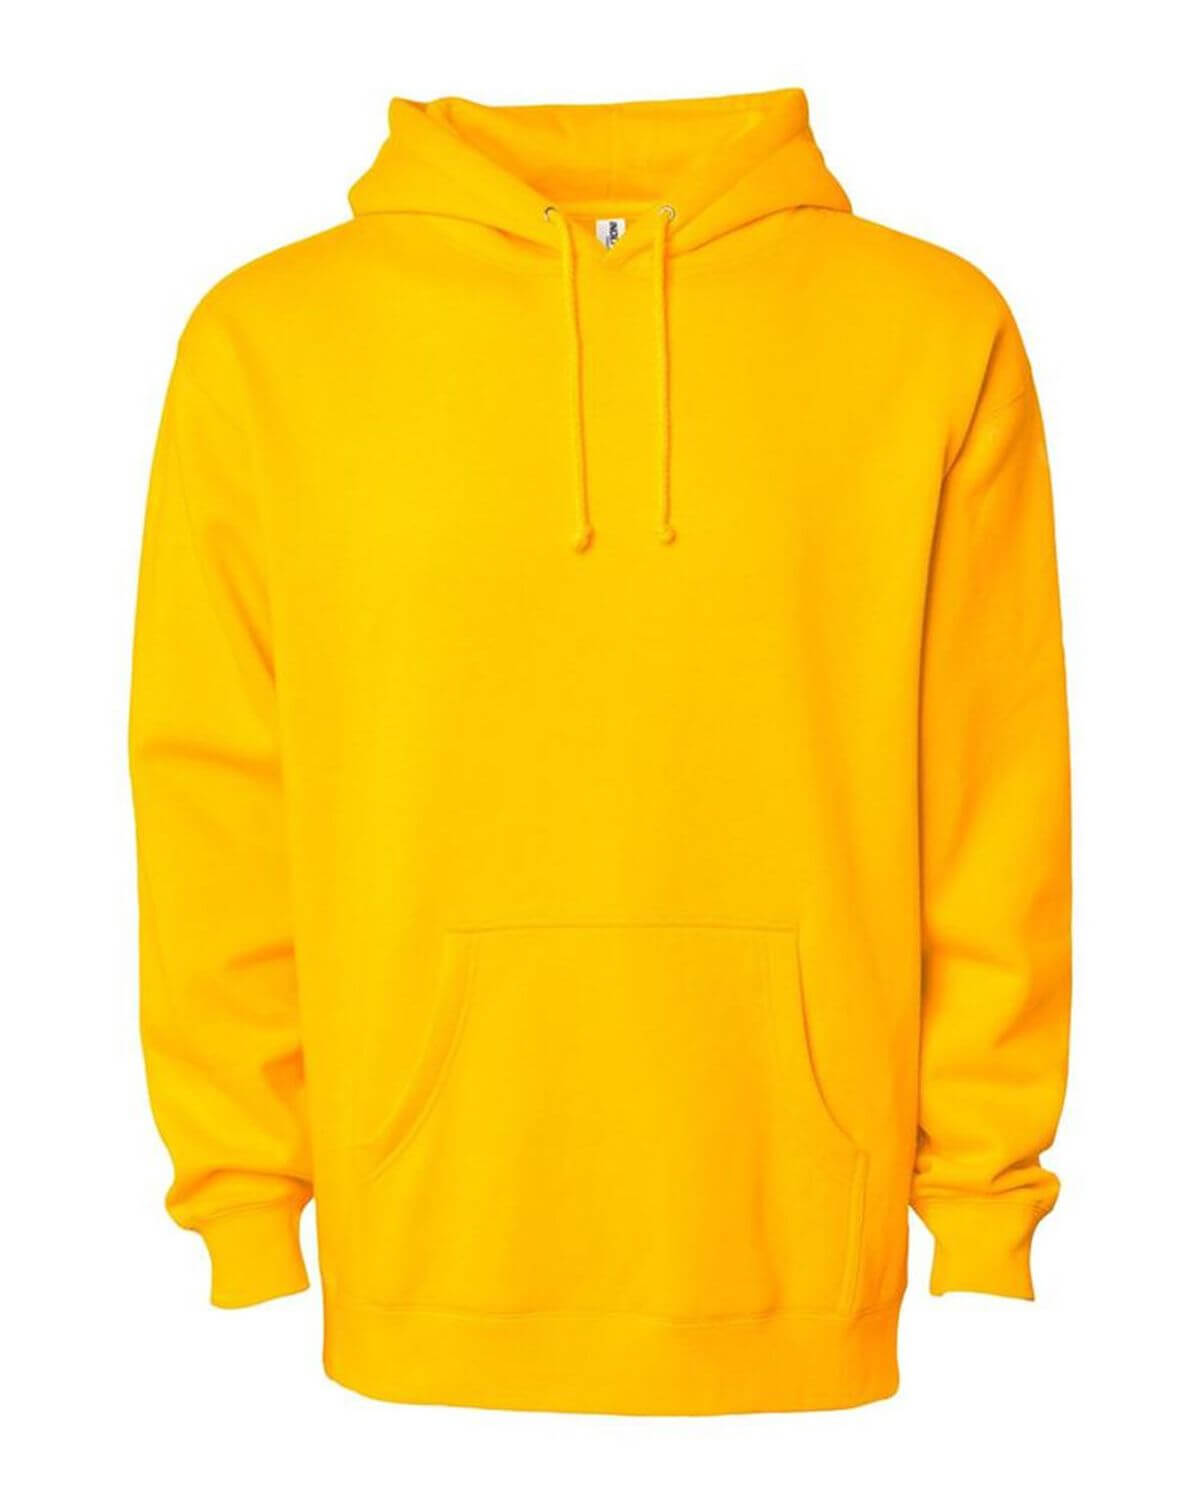 Bulk Order Heavyweight Hooded Sweatshirt by Independent Trading Co.